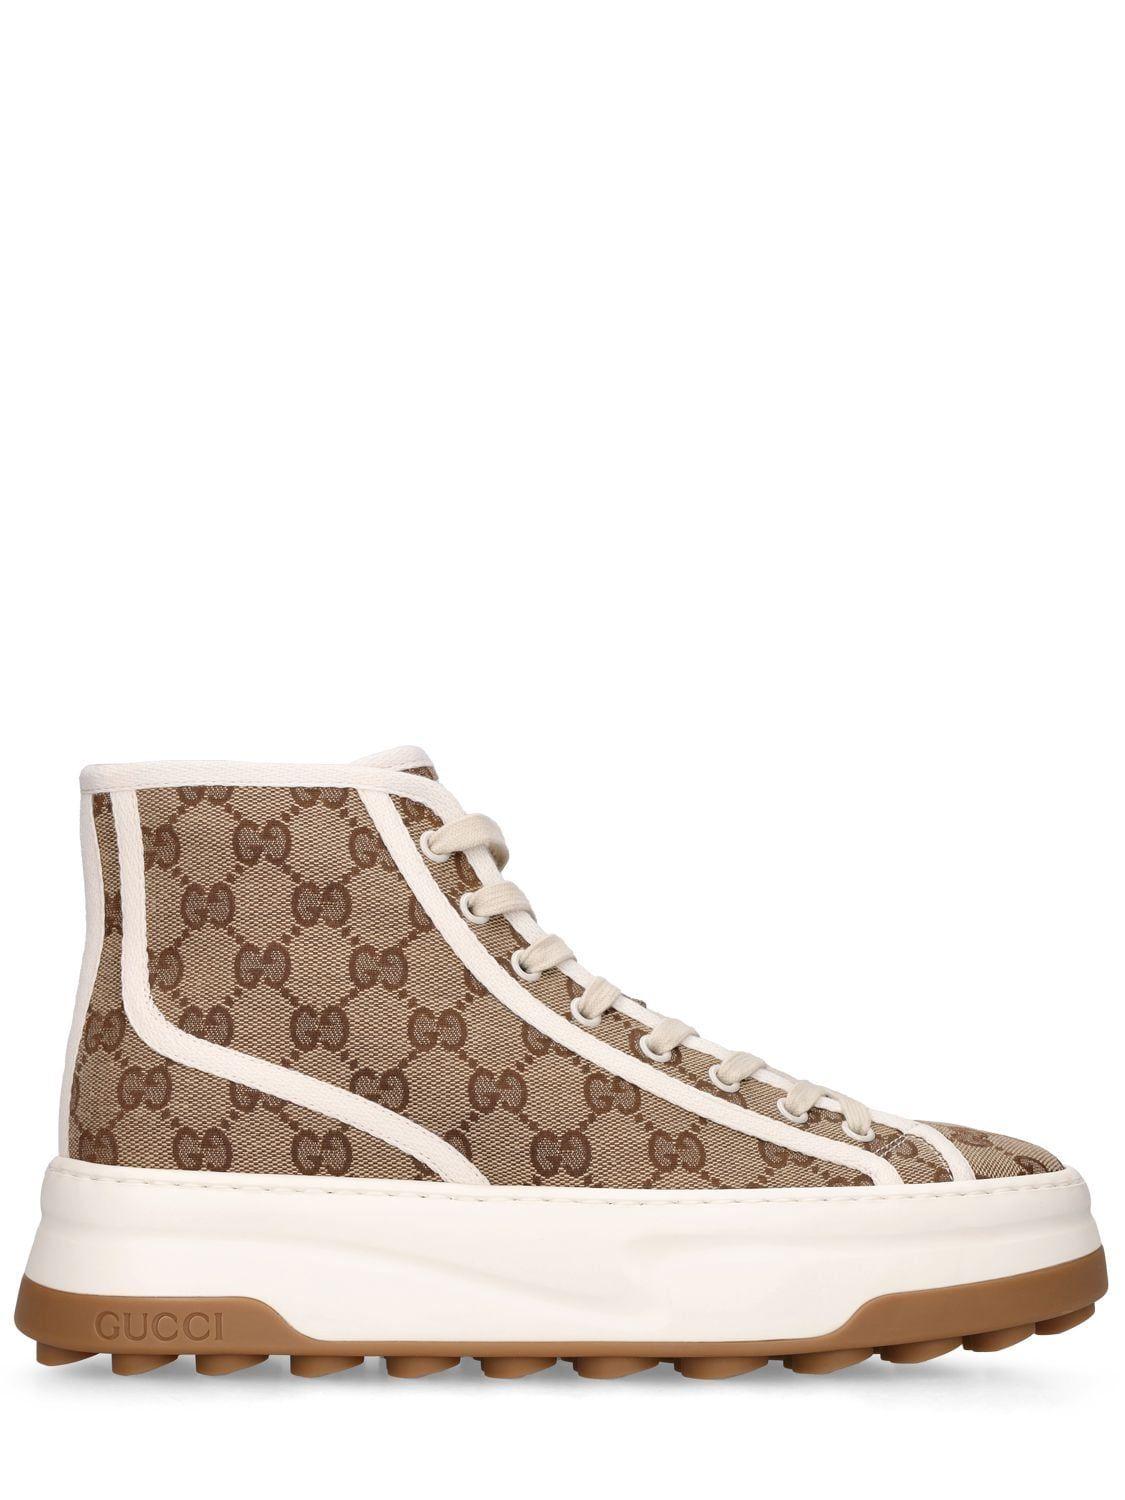 Gucci 50mm Tennis Treck Sneakers in Natural | Lyst